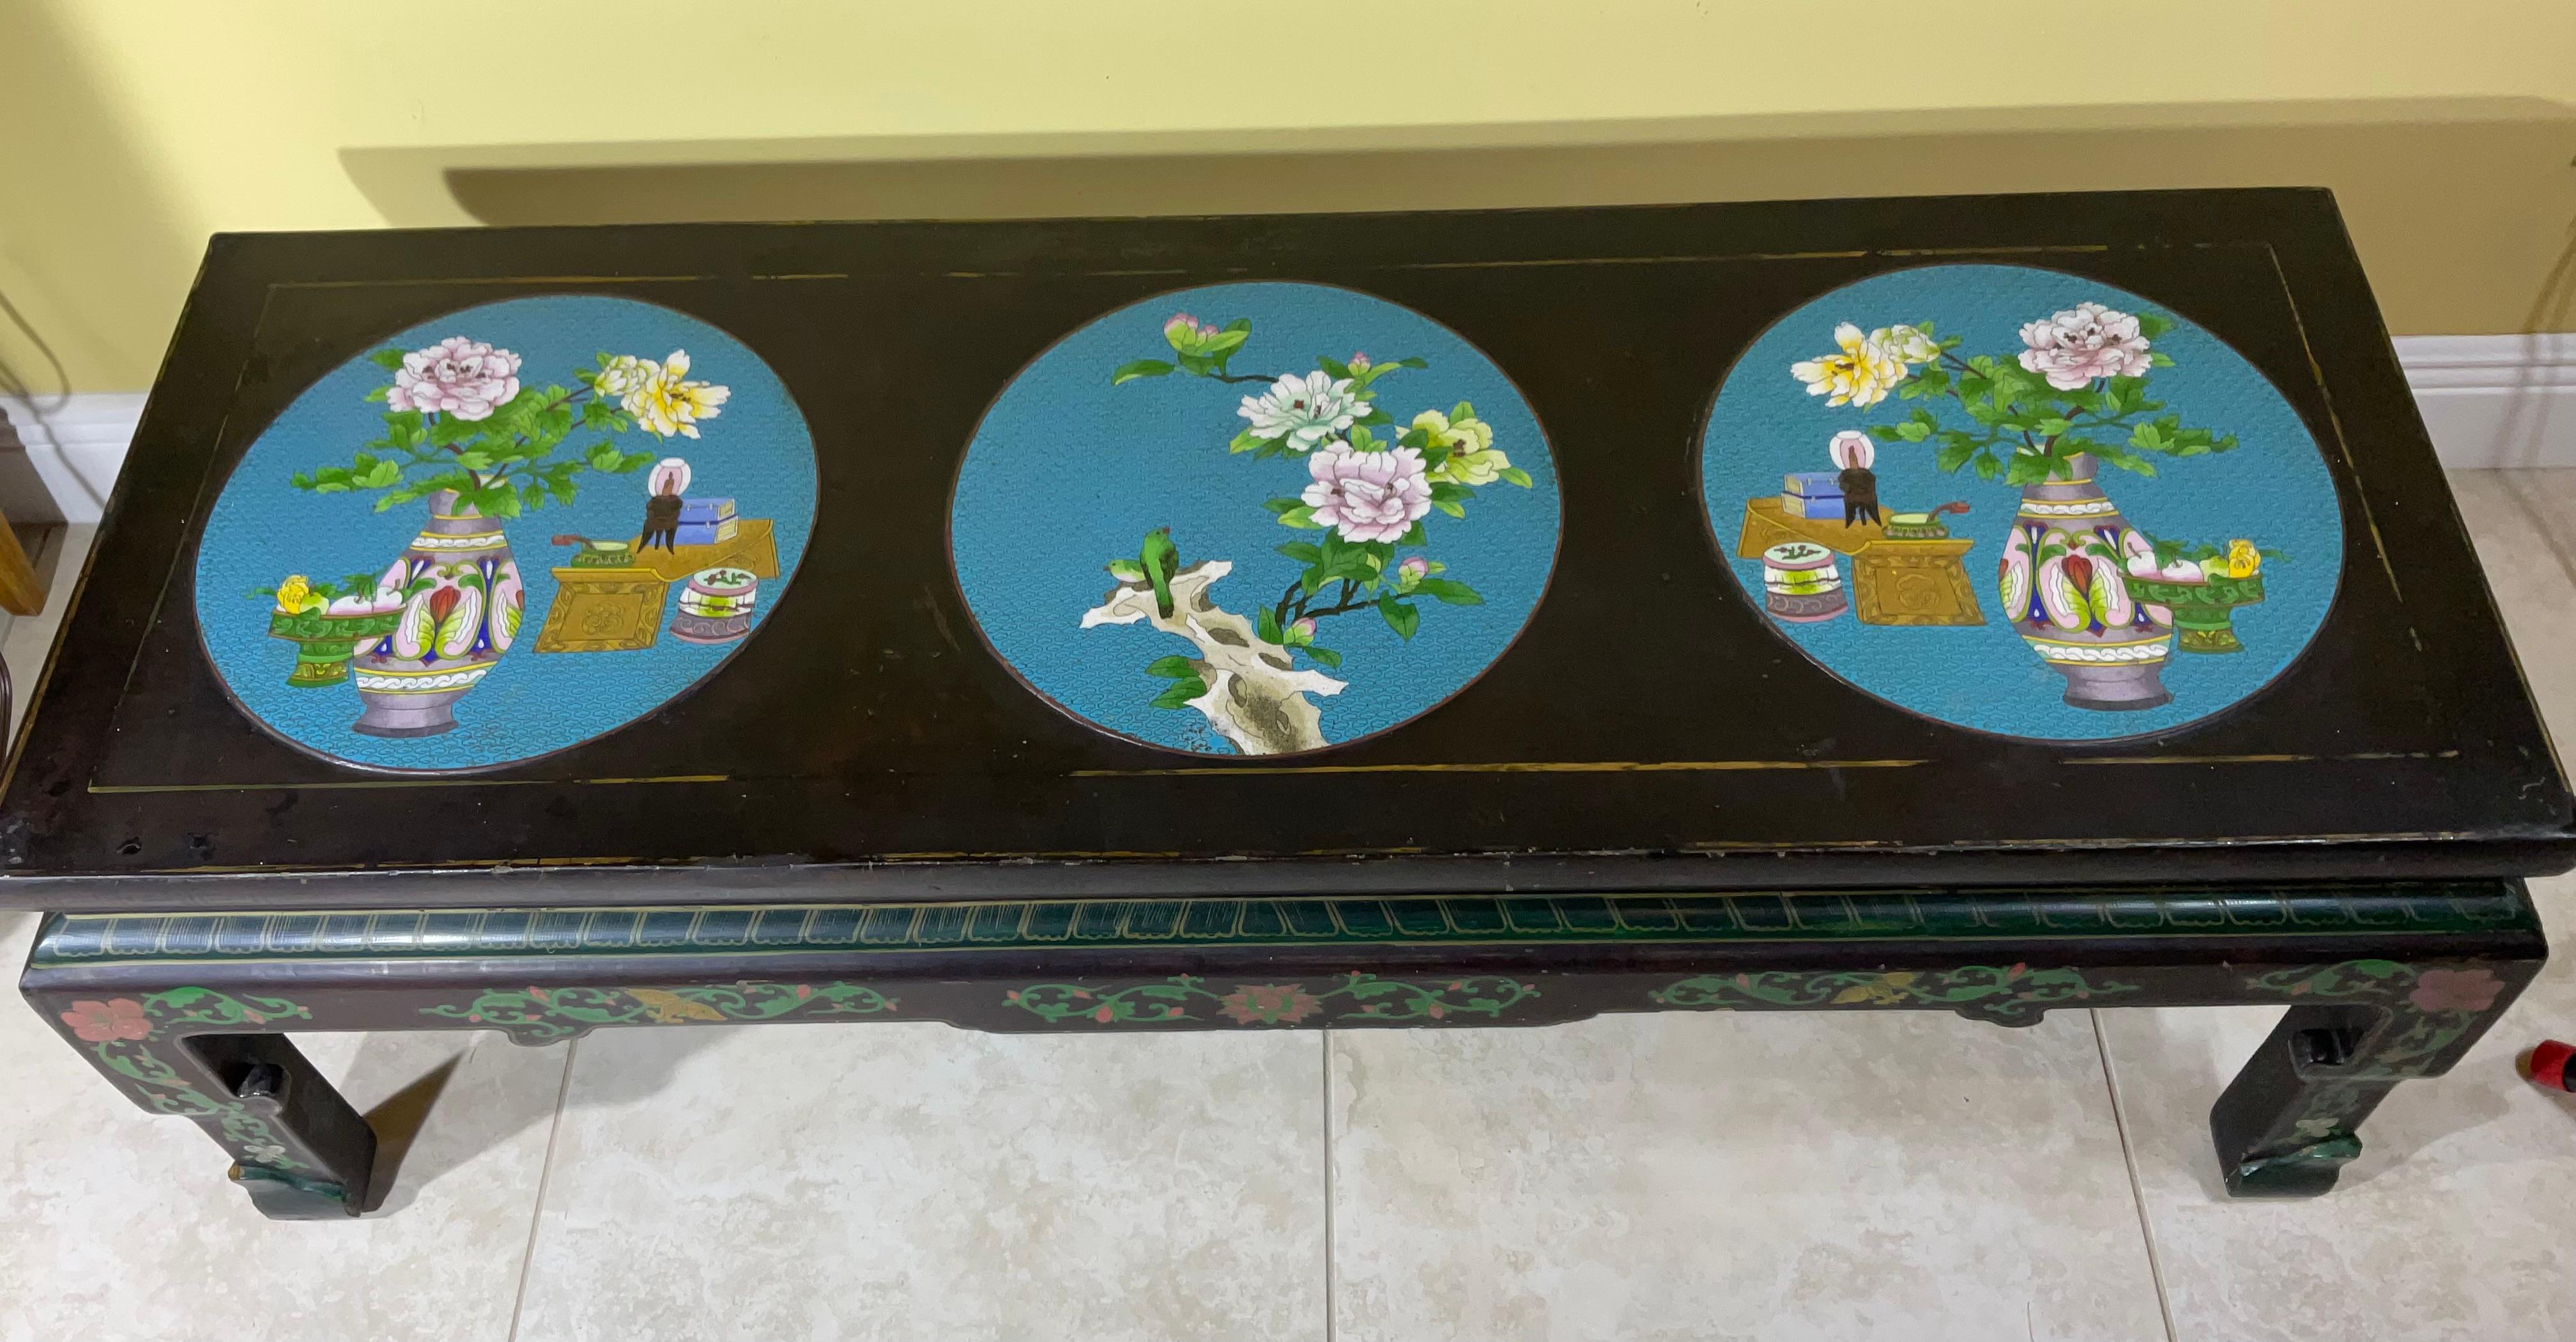 A black lacquer Chinese coffee table with three large cloisonné turquoise circles on top , depicting flowers birds and garden decor  , The four sides of the table are nicely hand painted , and the table is very solid standing on the floor and ready